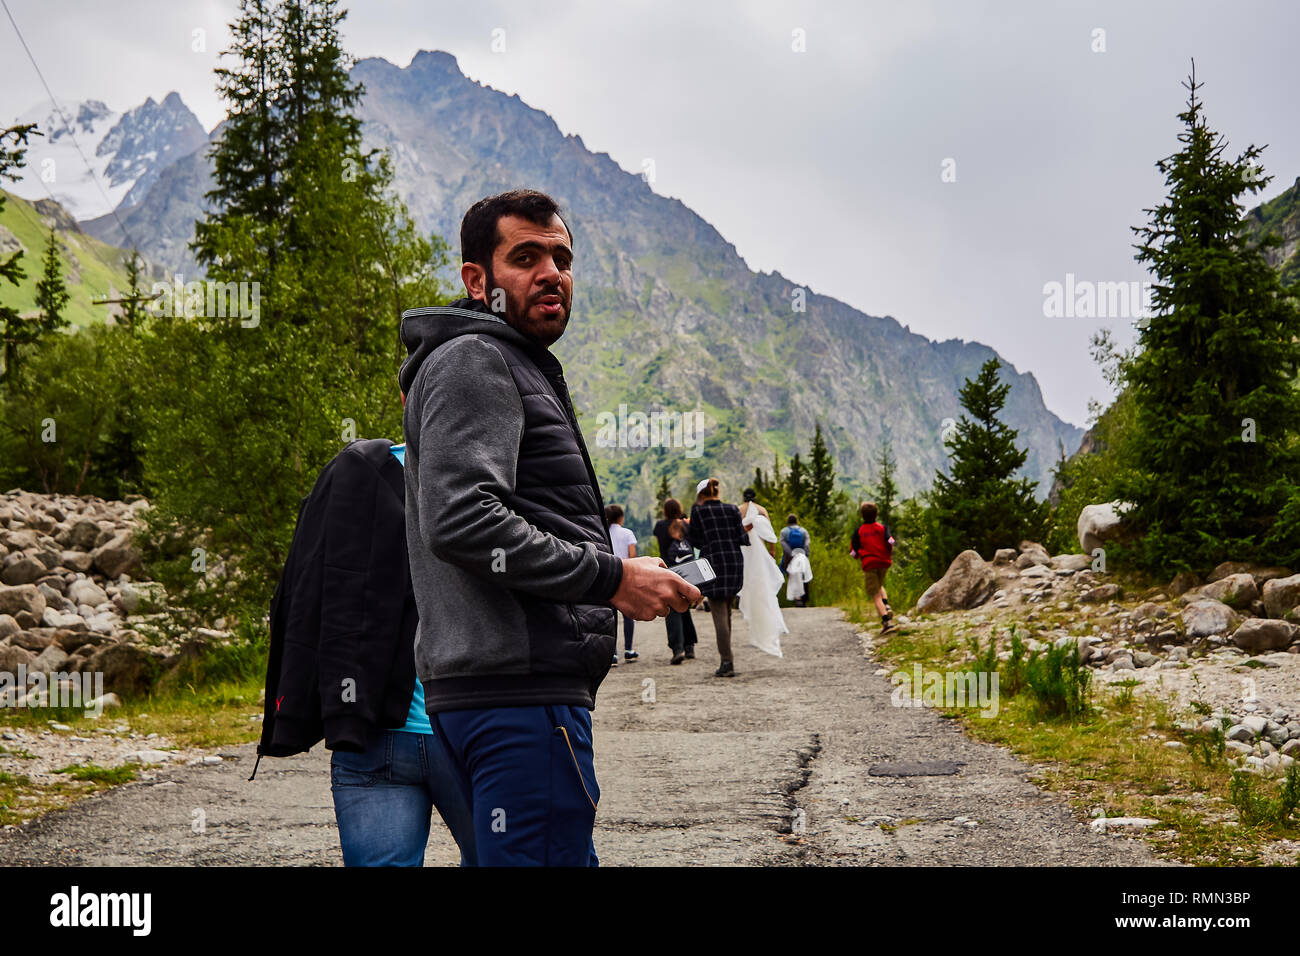 EDITORIAL, 02/08/2018 / Kyrgyzstan Ala-Archa gorge. An adult male tourist climbs the mountain road with a small group of people. Stock Photo